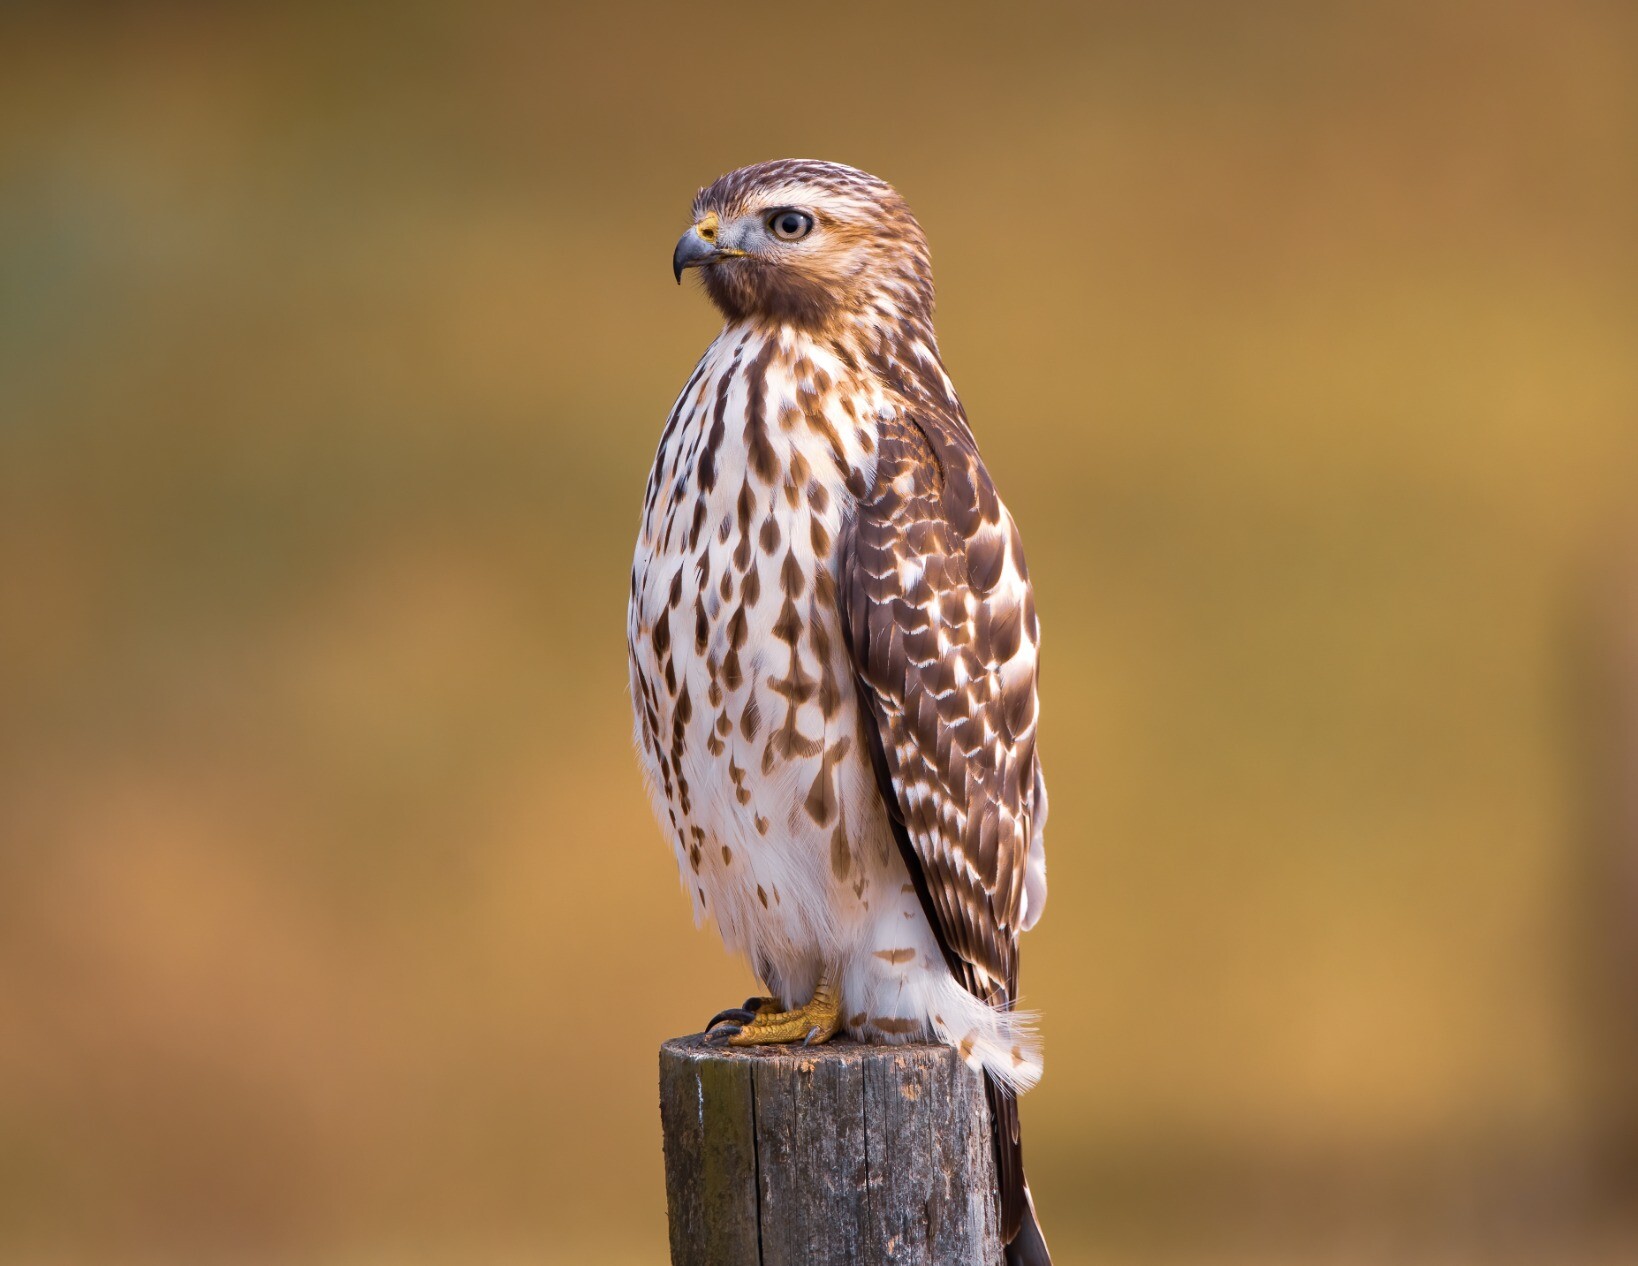 A red shouldered hawk perched on a fence post with an open field in the background. the hawk is perfectly still and has a combination of brown and white feathers